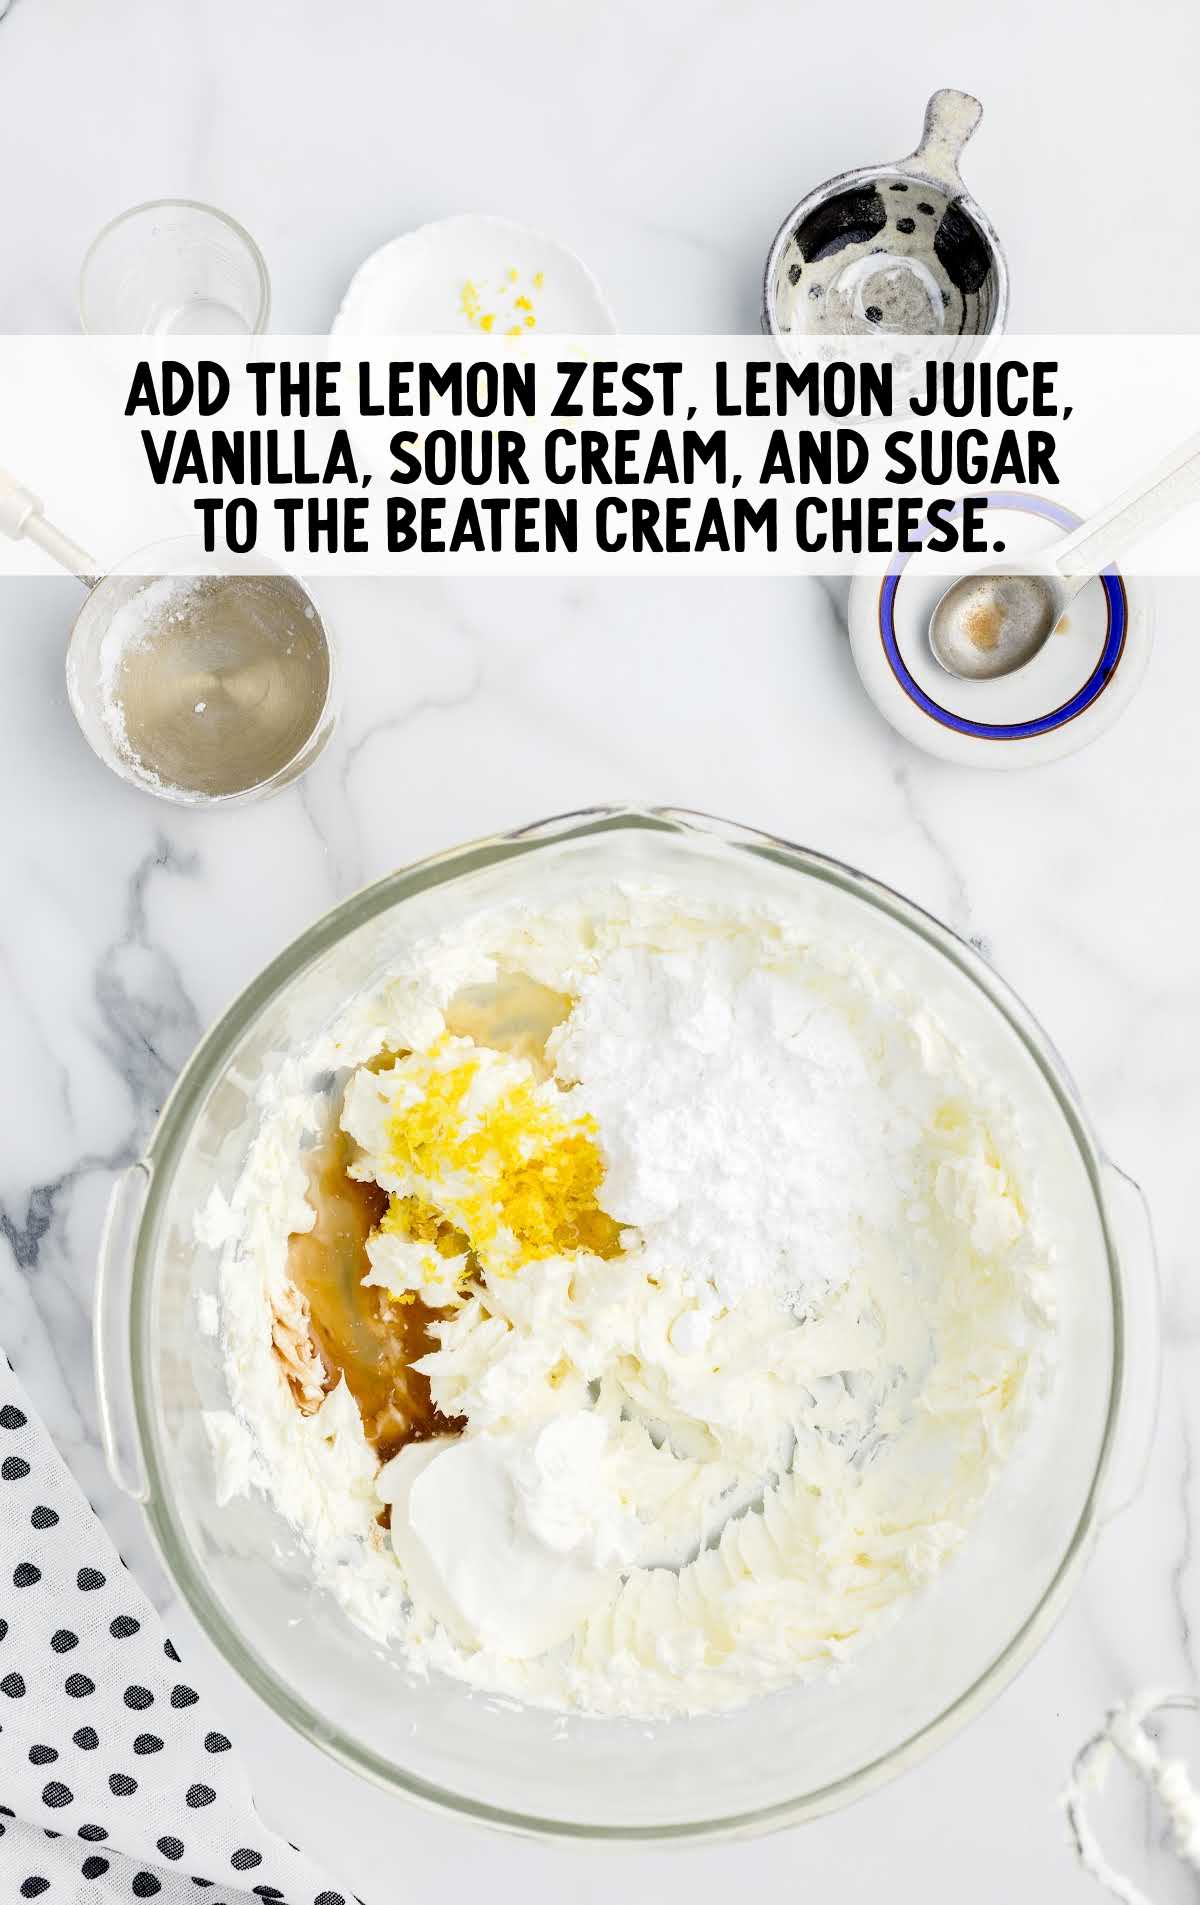 lemon zest, lemon juice, vanilla extract, sour cream, and powdered sugar added to the beaten cream cheese in a bowl